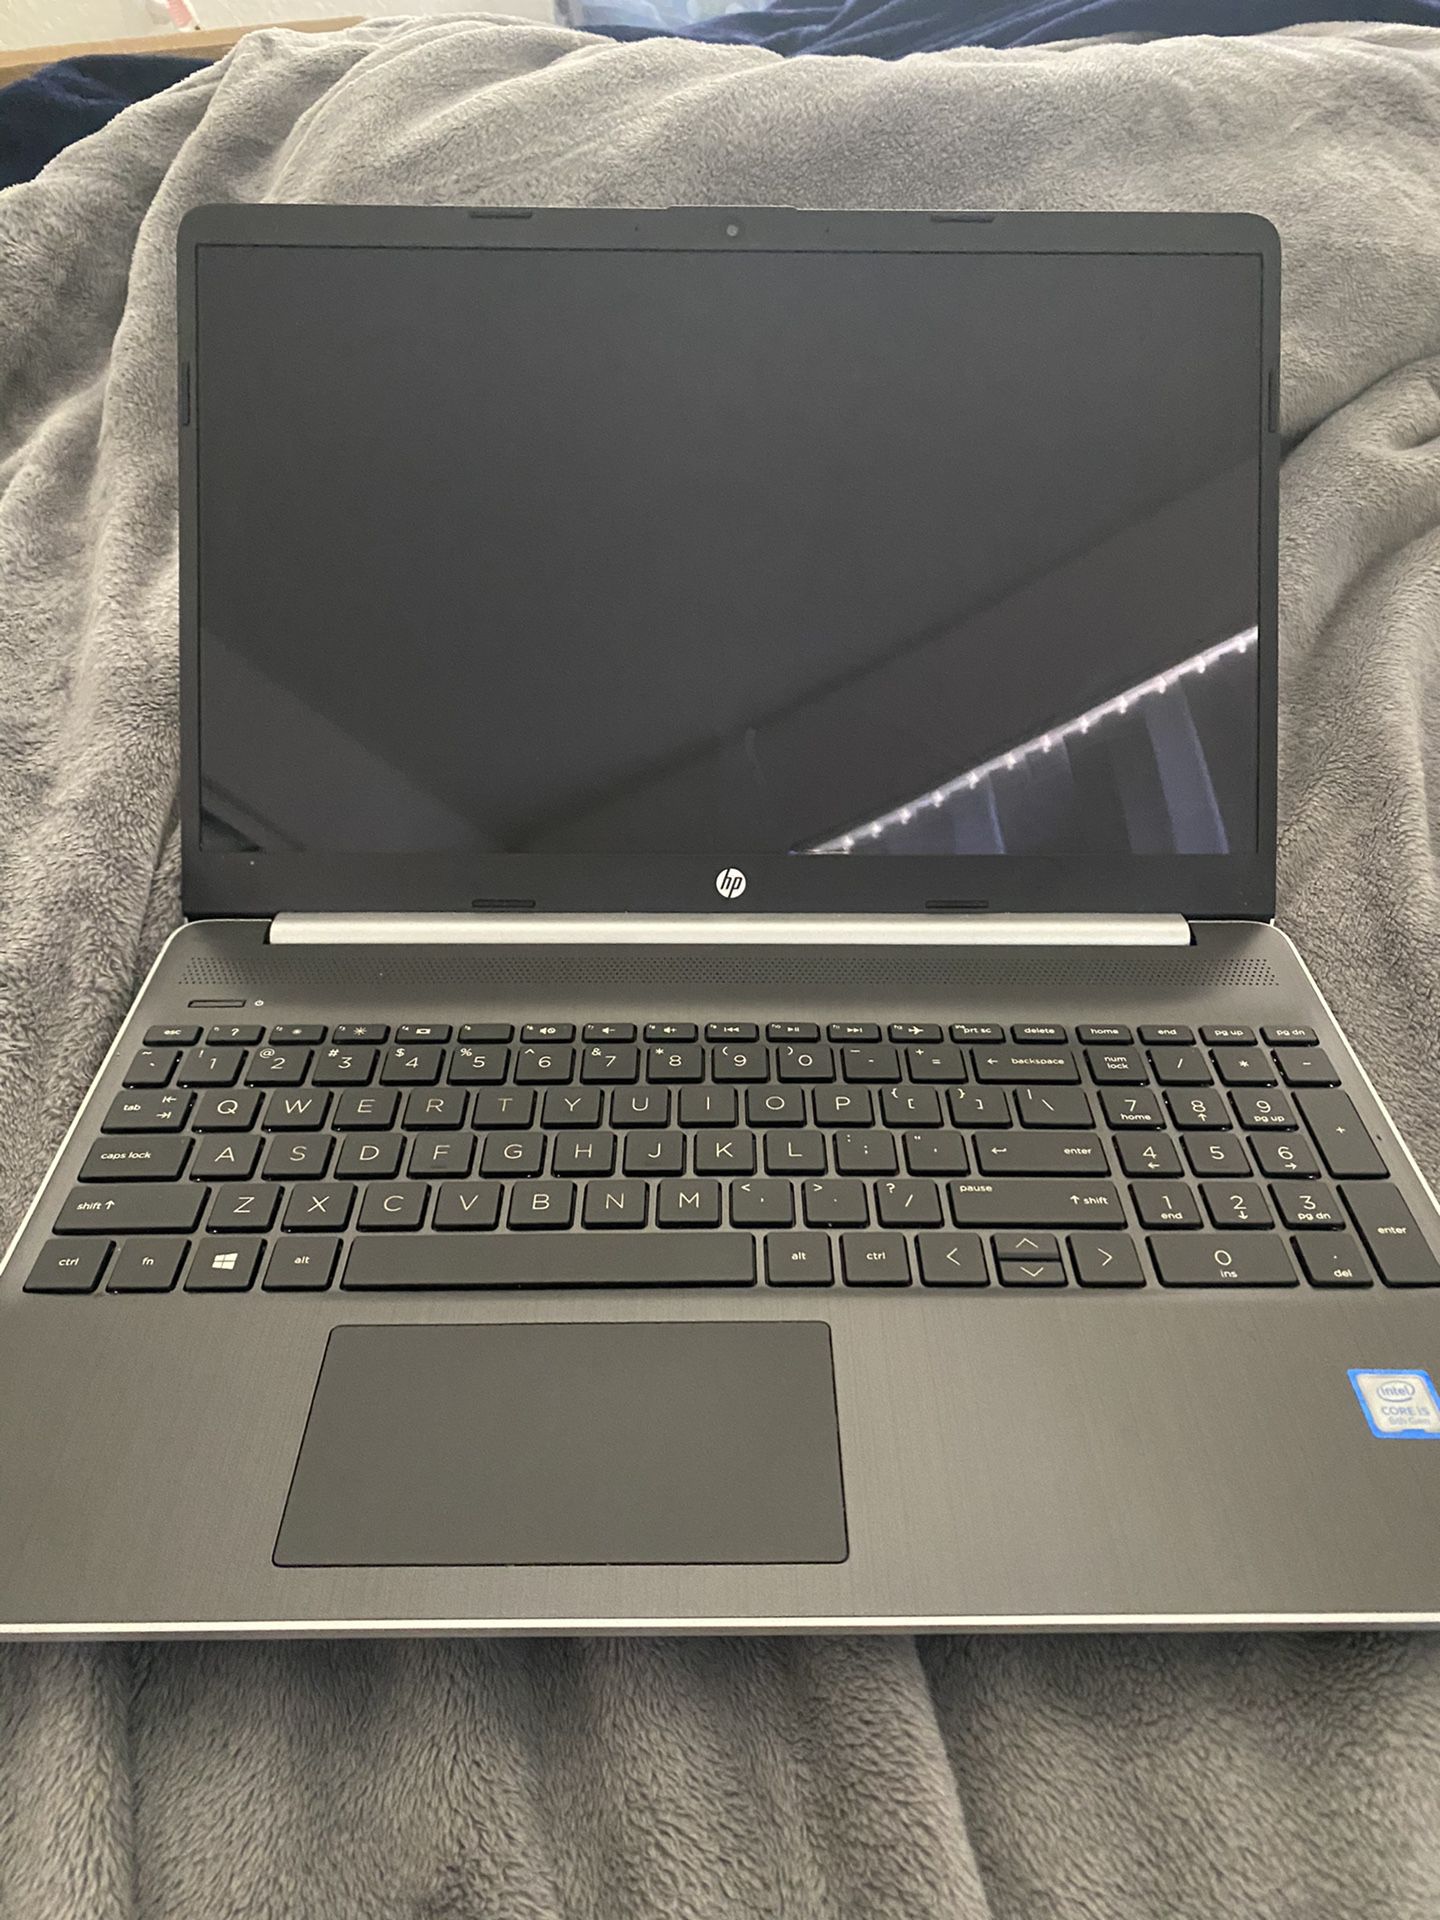 HP Laptop (LCD SCREEN IS CRACKED)